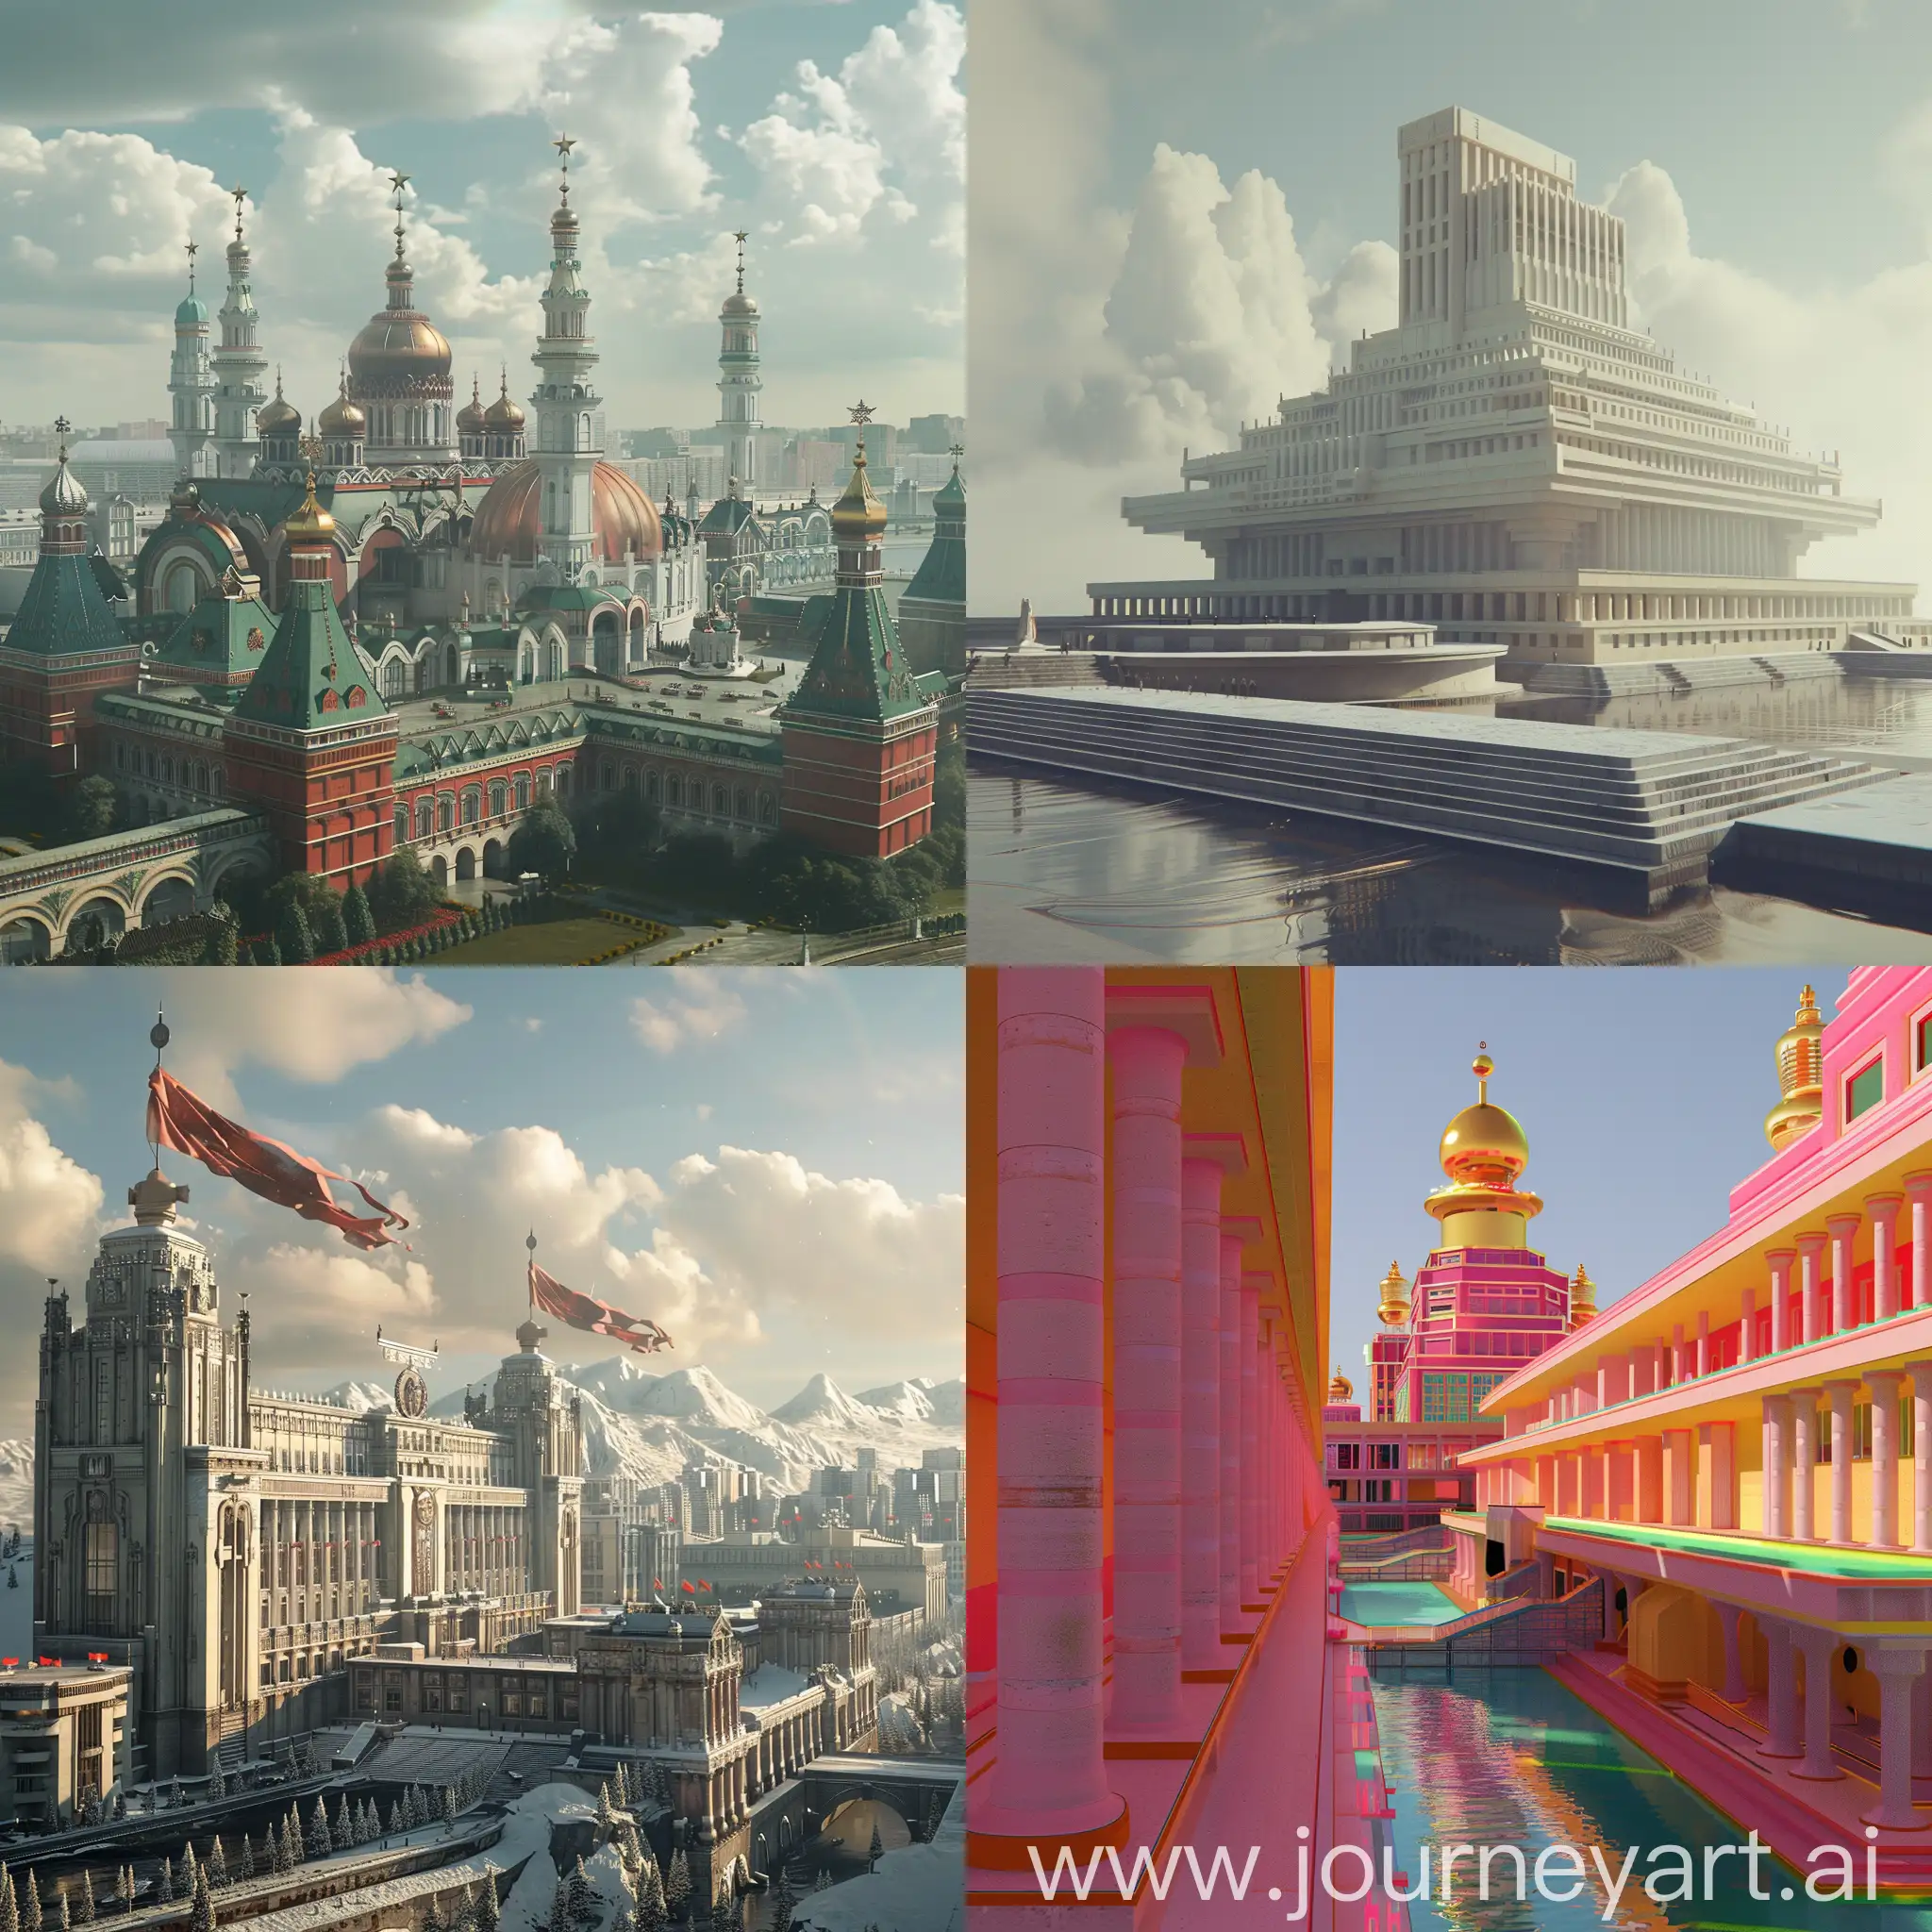 Impressive-3D-Animation-of-the-Palace-of-Soviets-in-Moscow